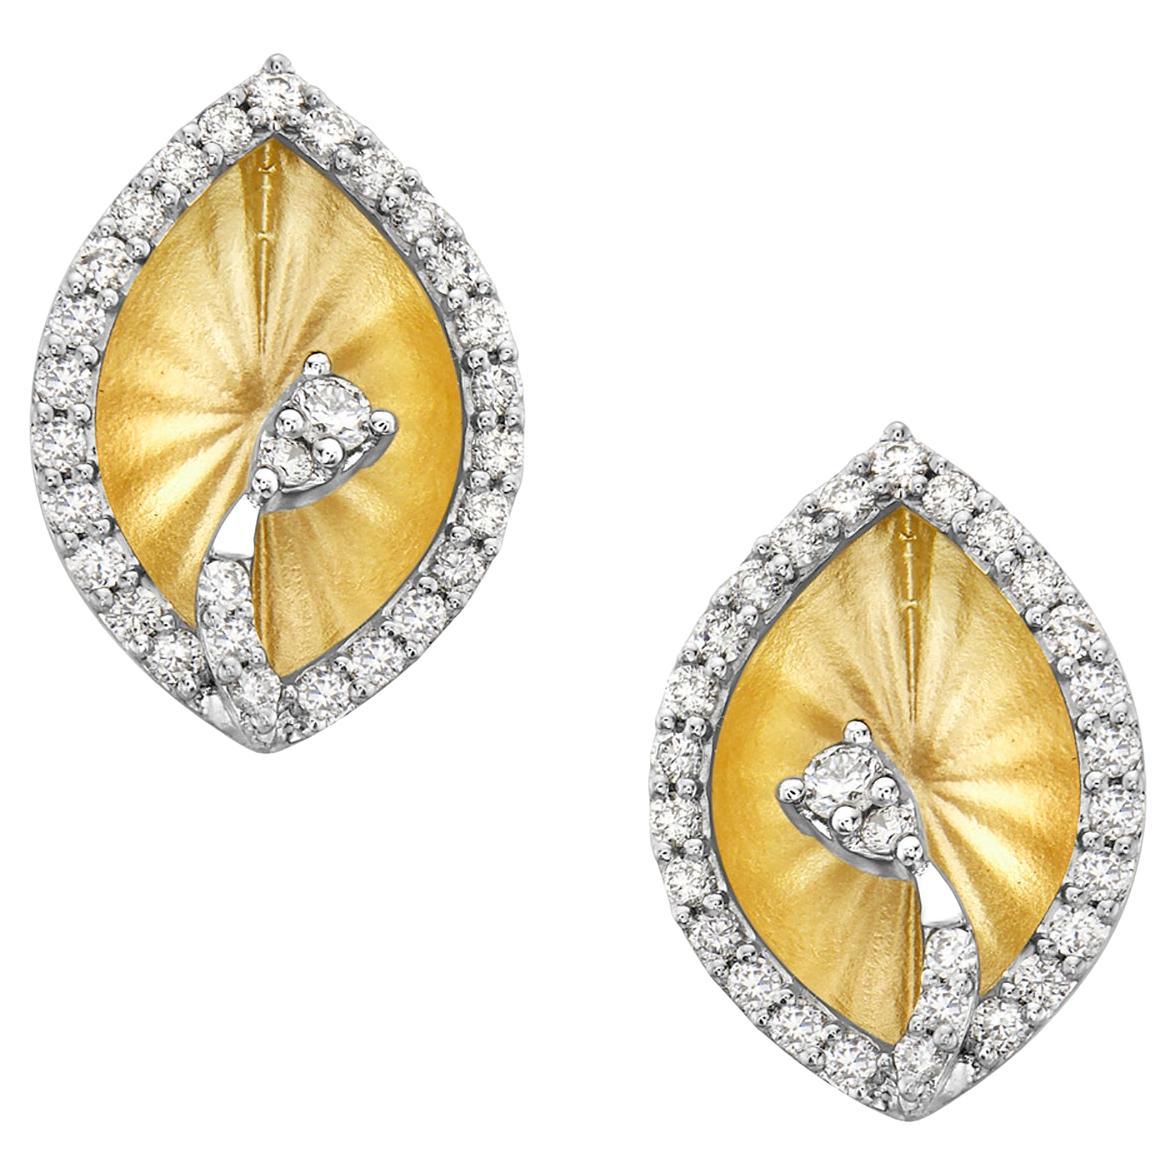 Pear Shaped Carved Stud Earrings Made in 14k Yellow Gold with Diamonds on Border